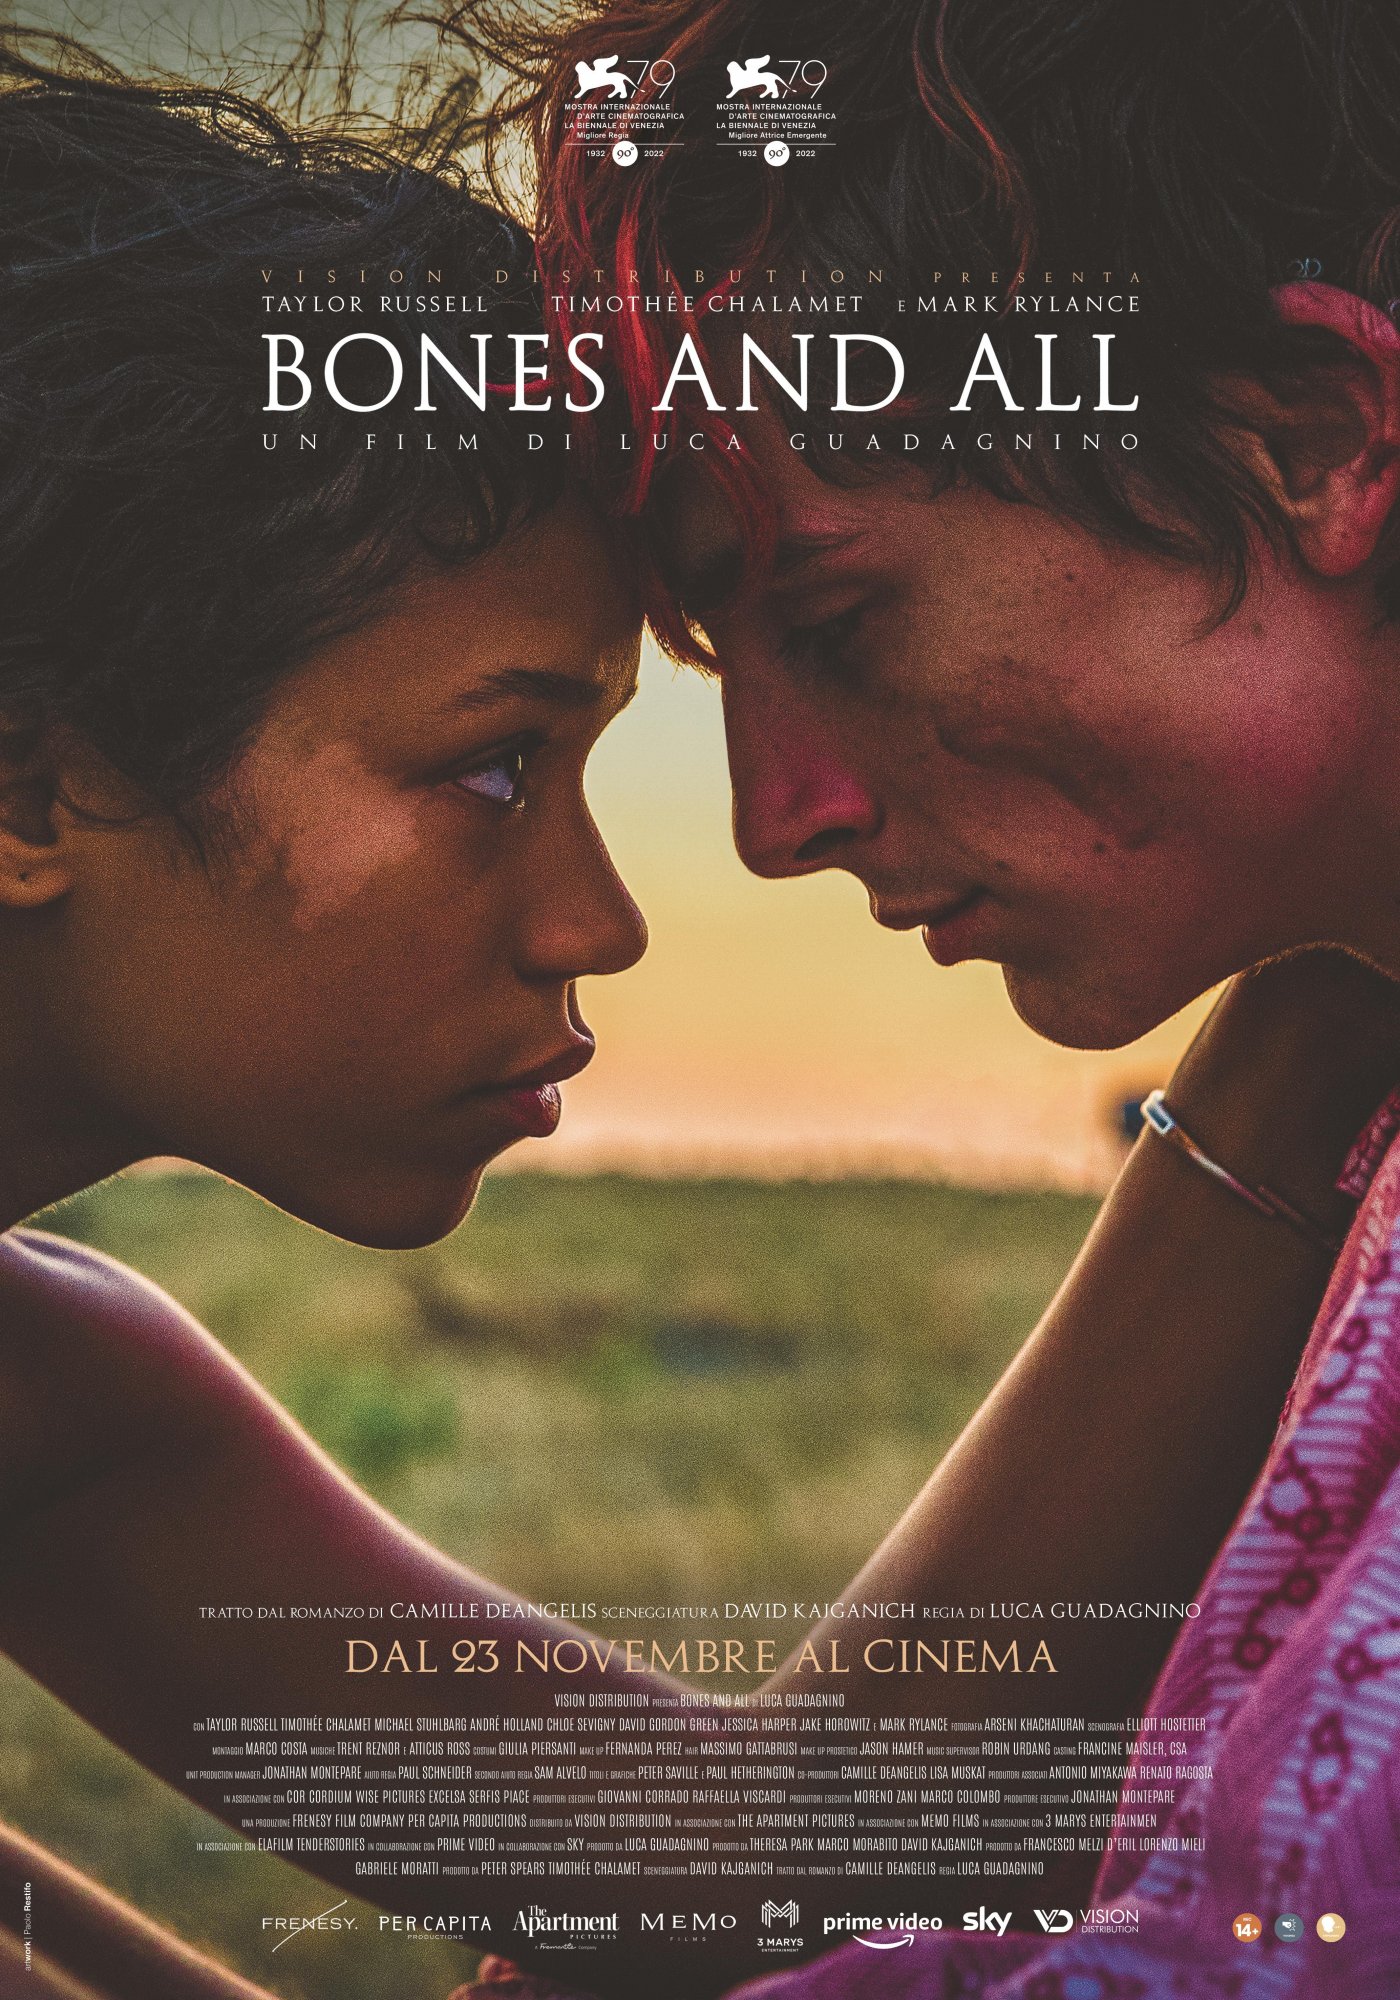 https://movieplayer.it/film/bones-and-all_56880/